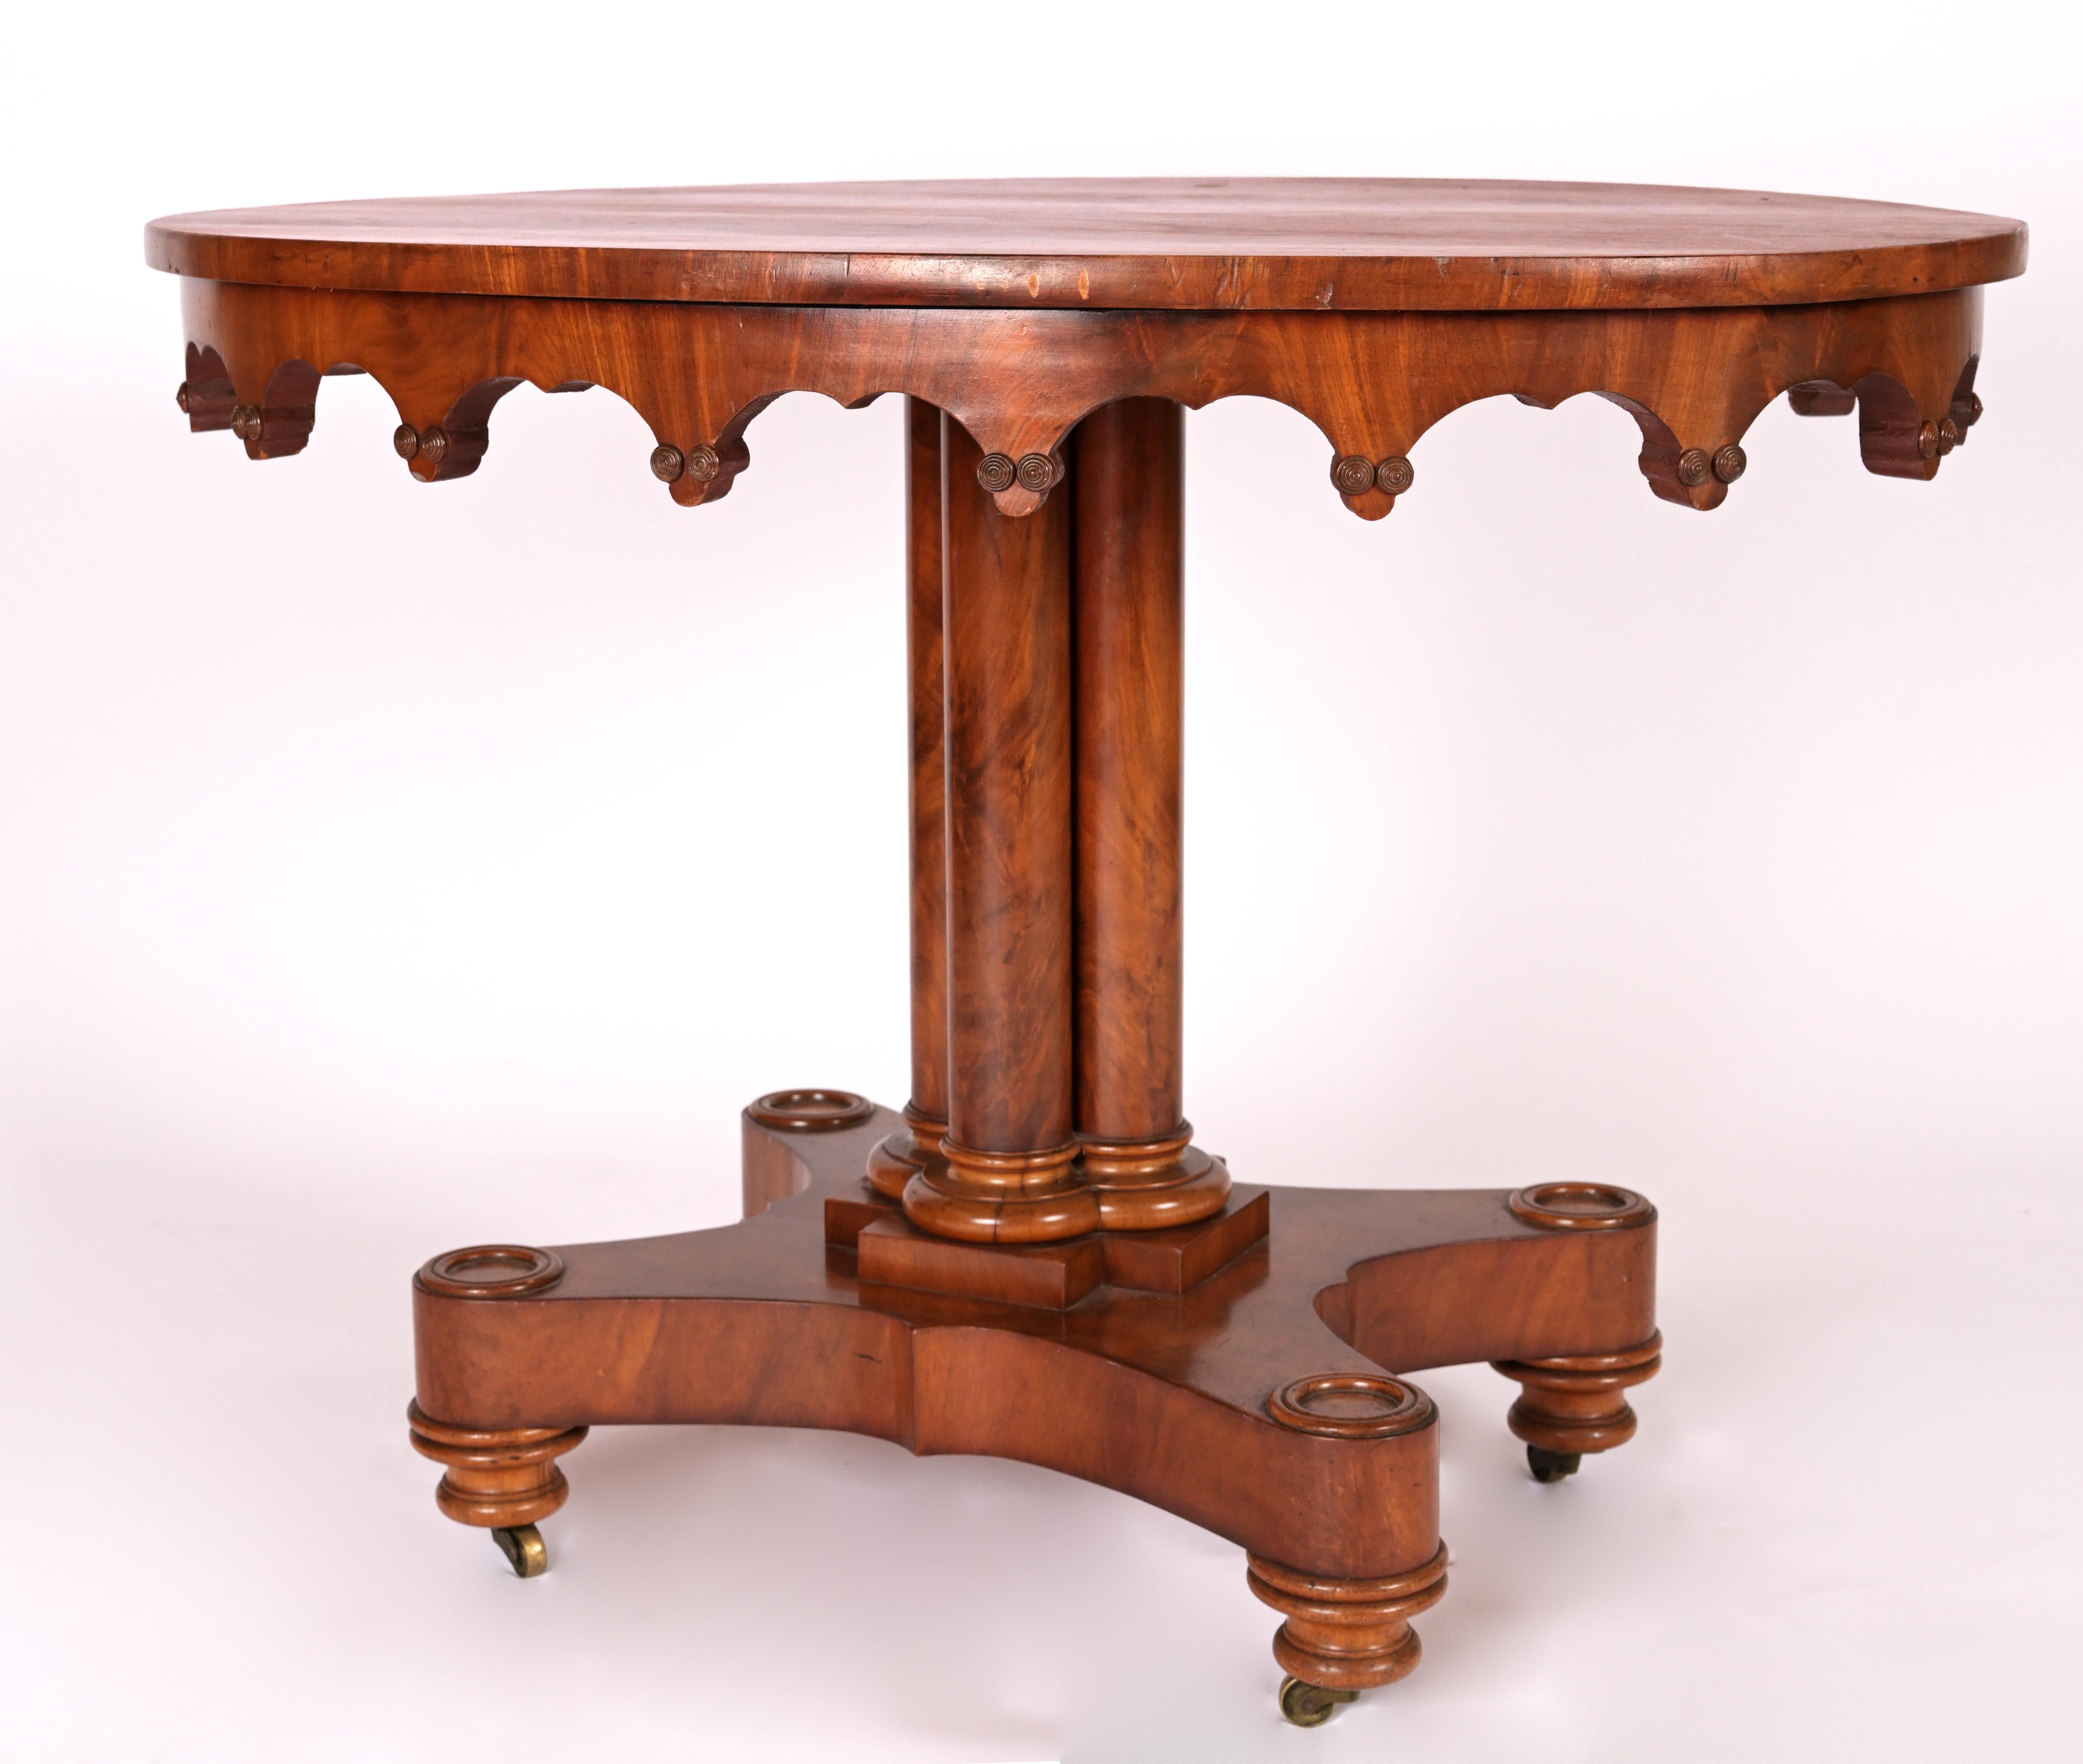 Mahogany Neo-Gothic center table with sharp downward carvings and stem base with four extruding stands. Circa 1830.